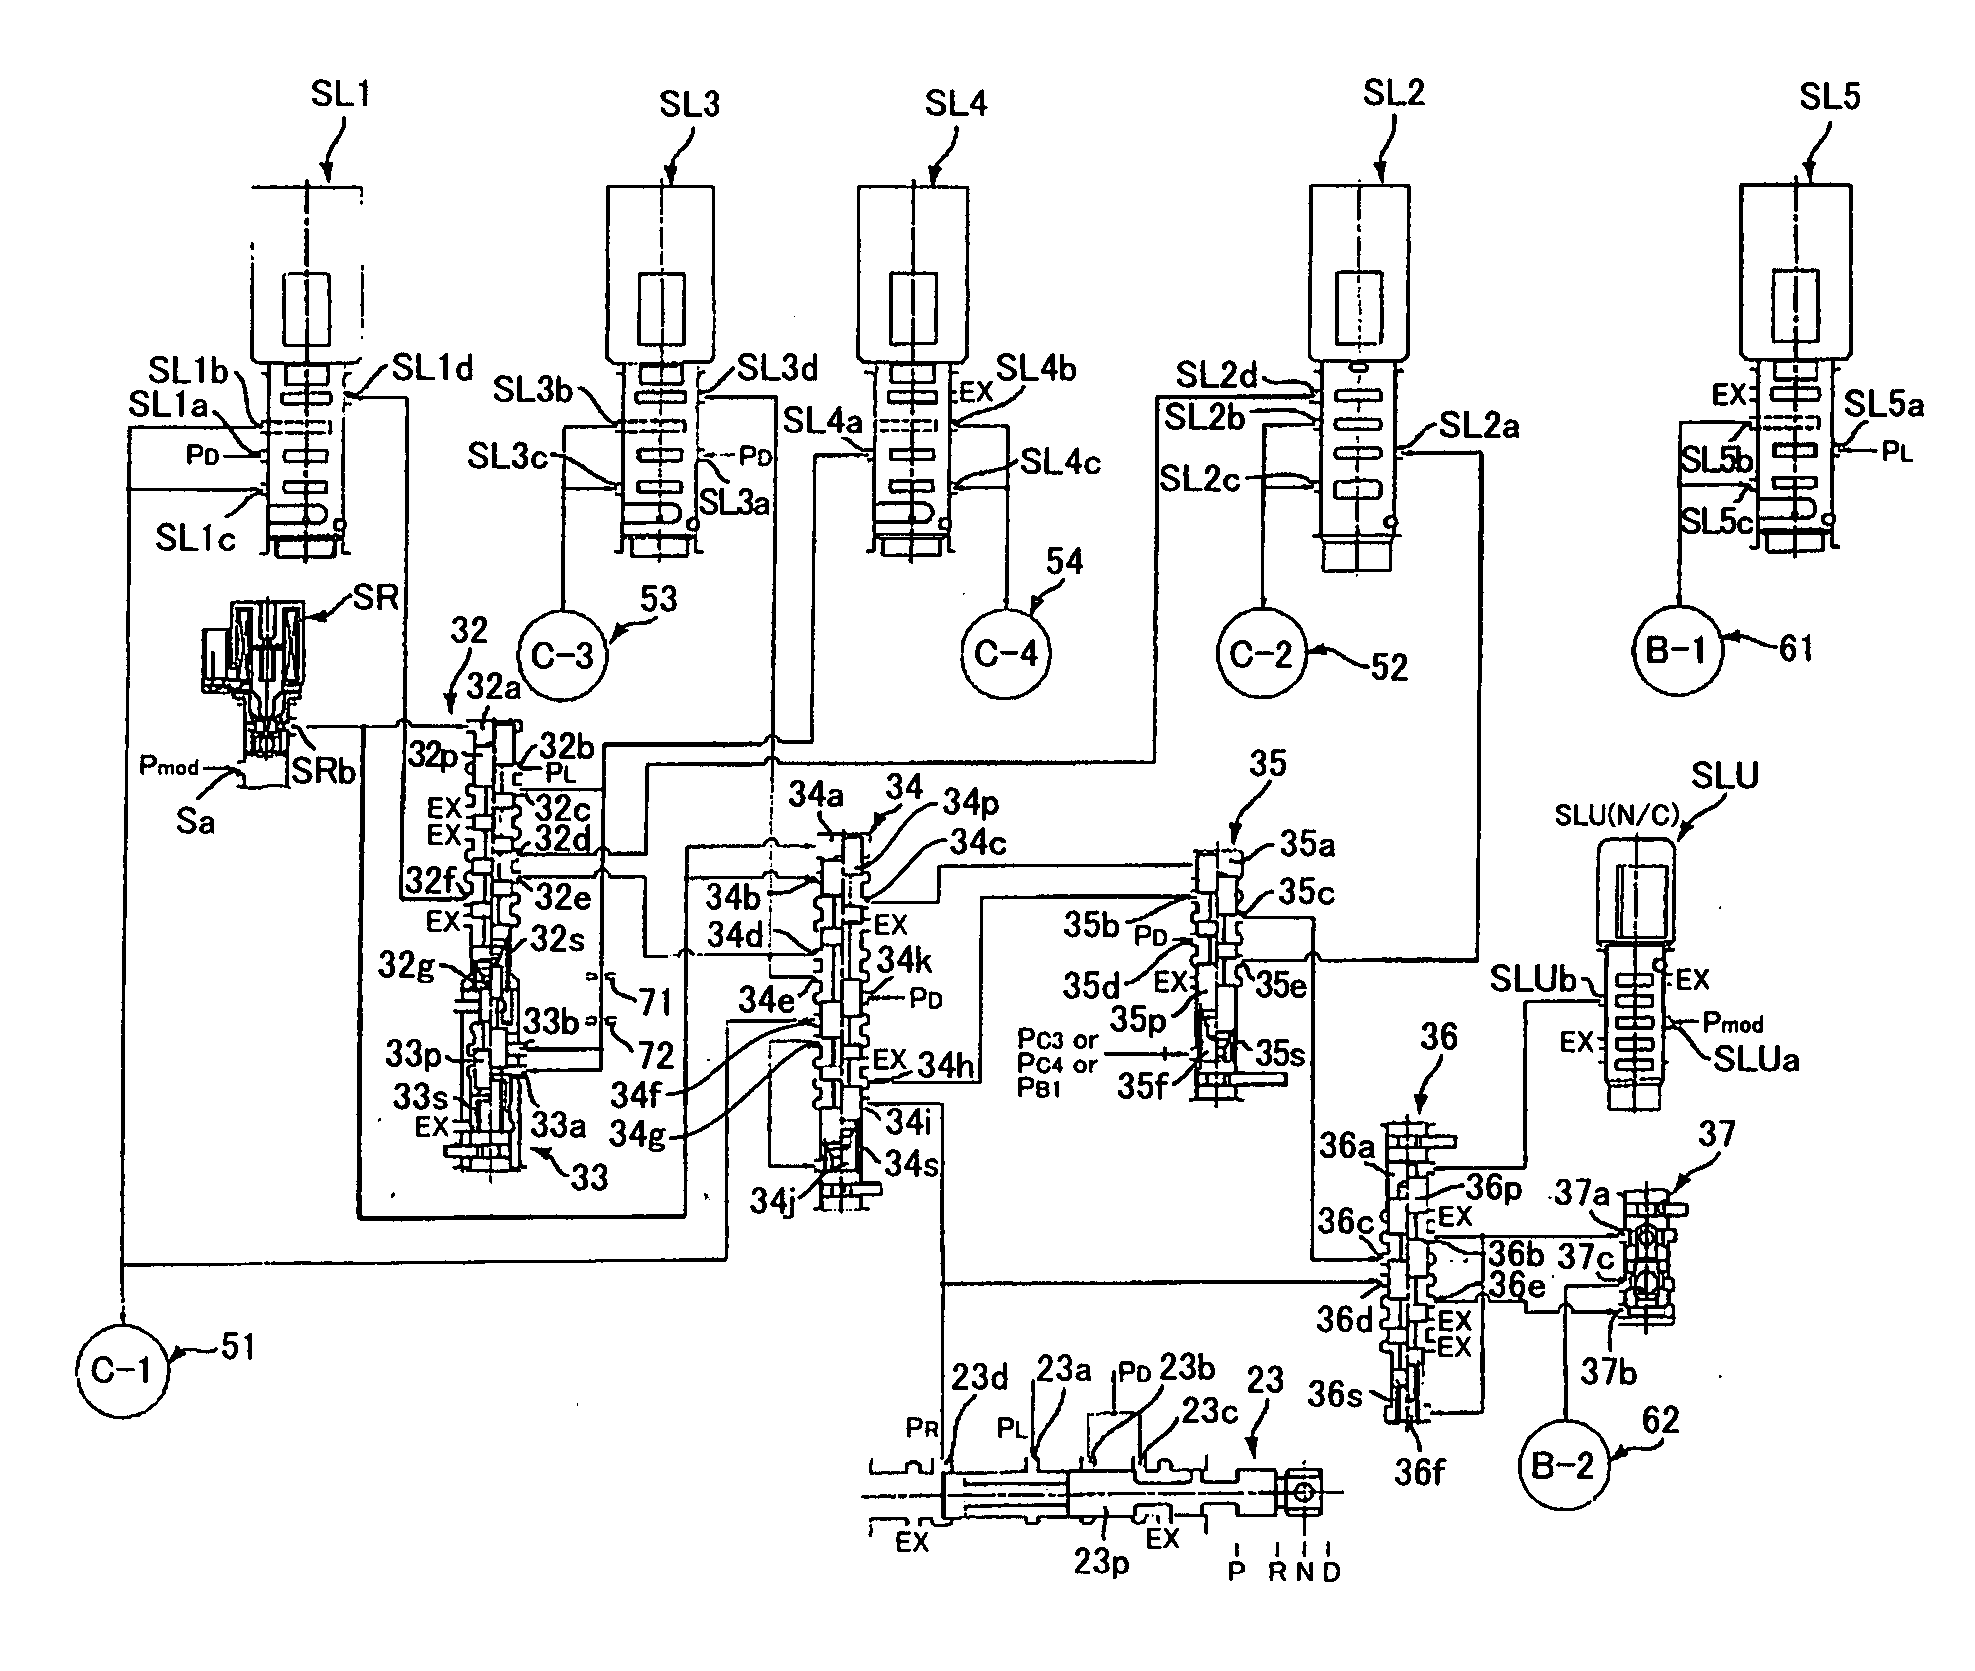 Hydraulic control apparatus for a multi-stage automatic transmission